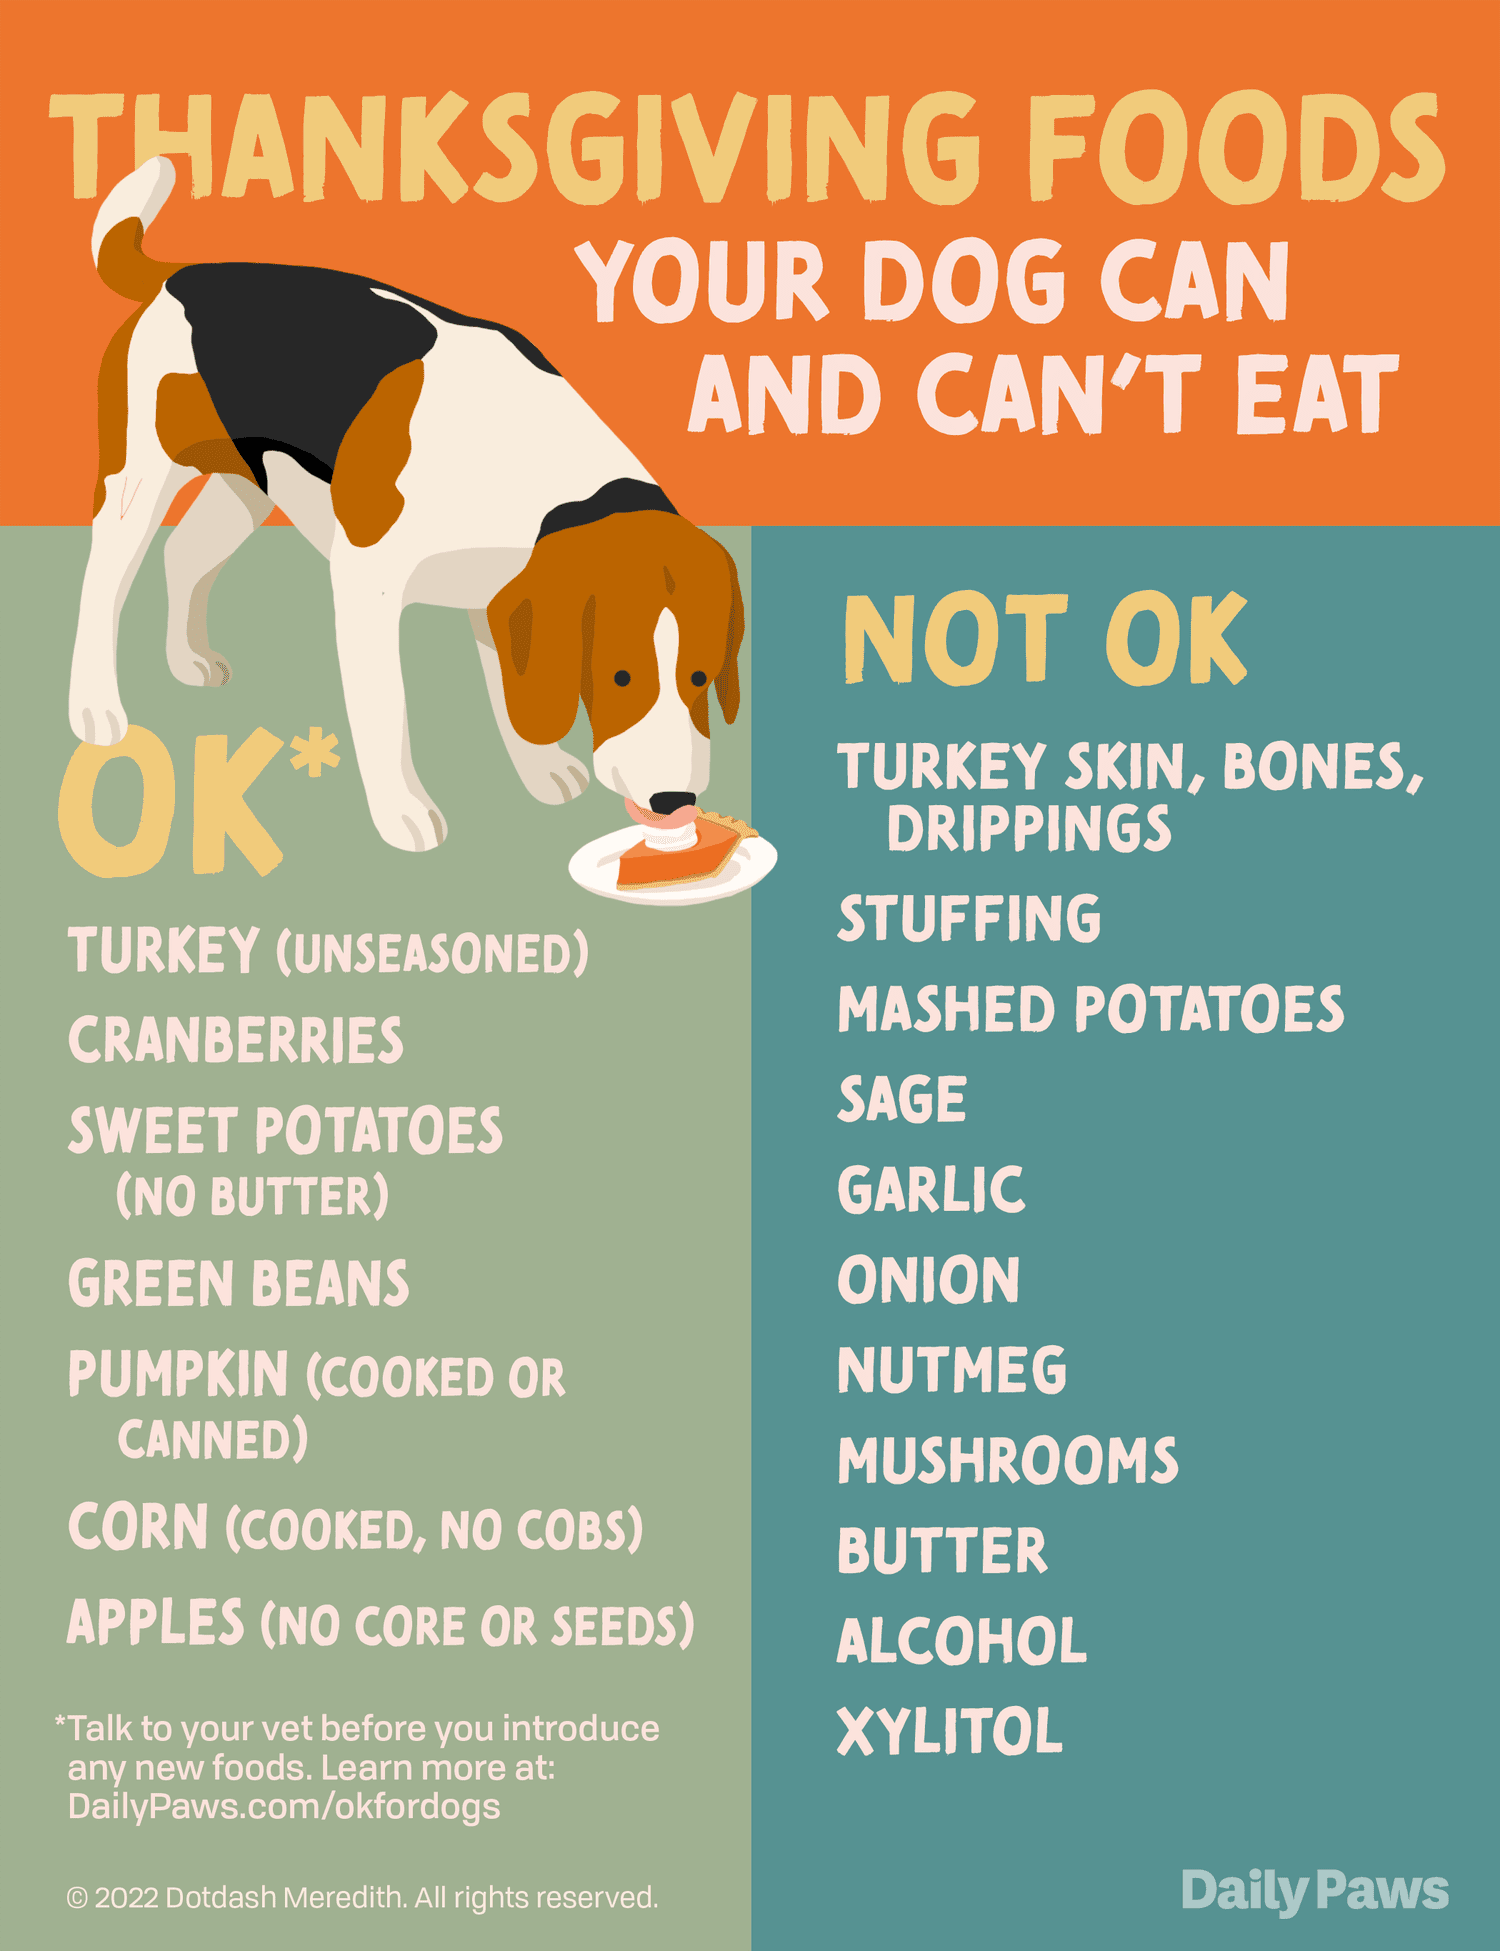 Thanksgiving foods your dog can and cannot eat infographic